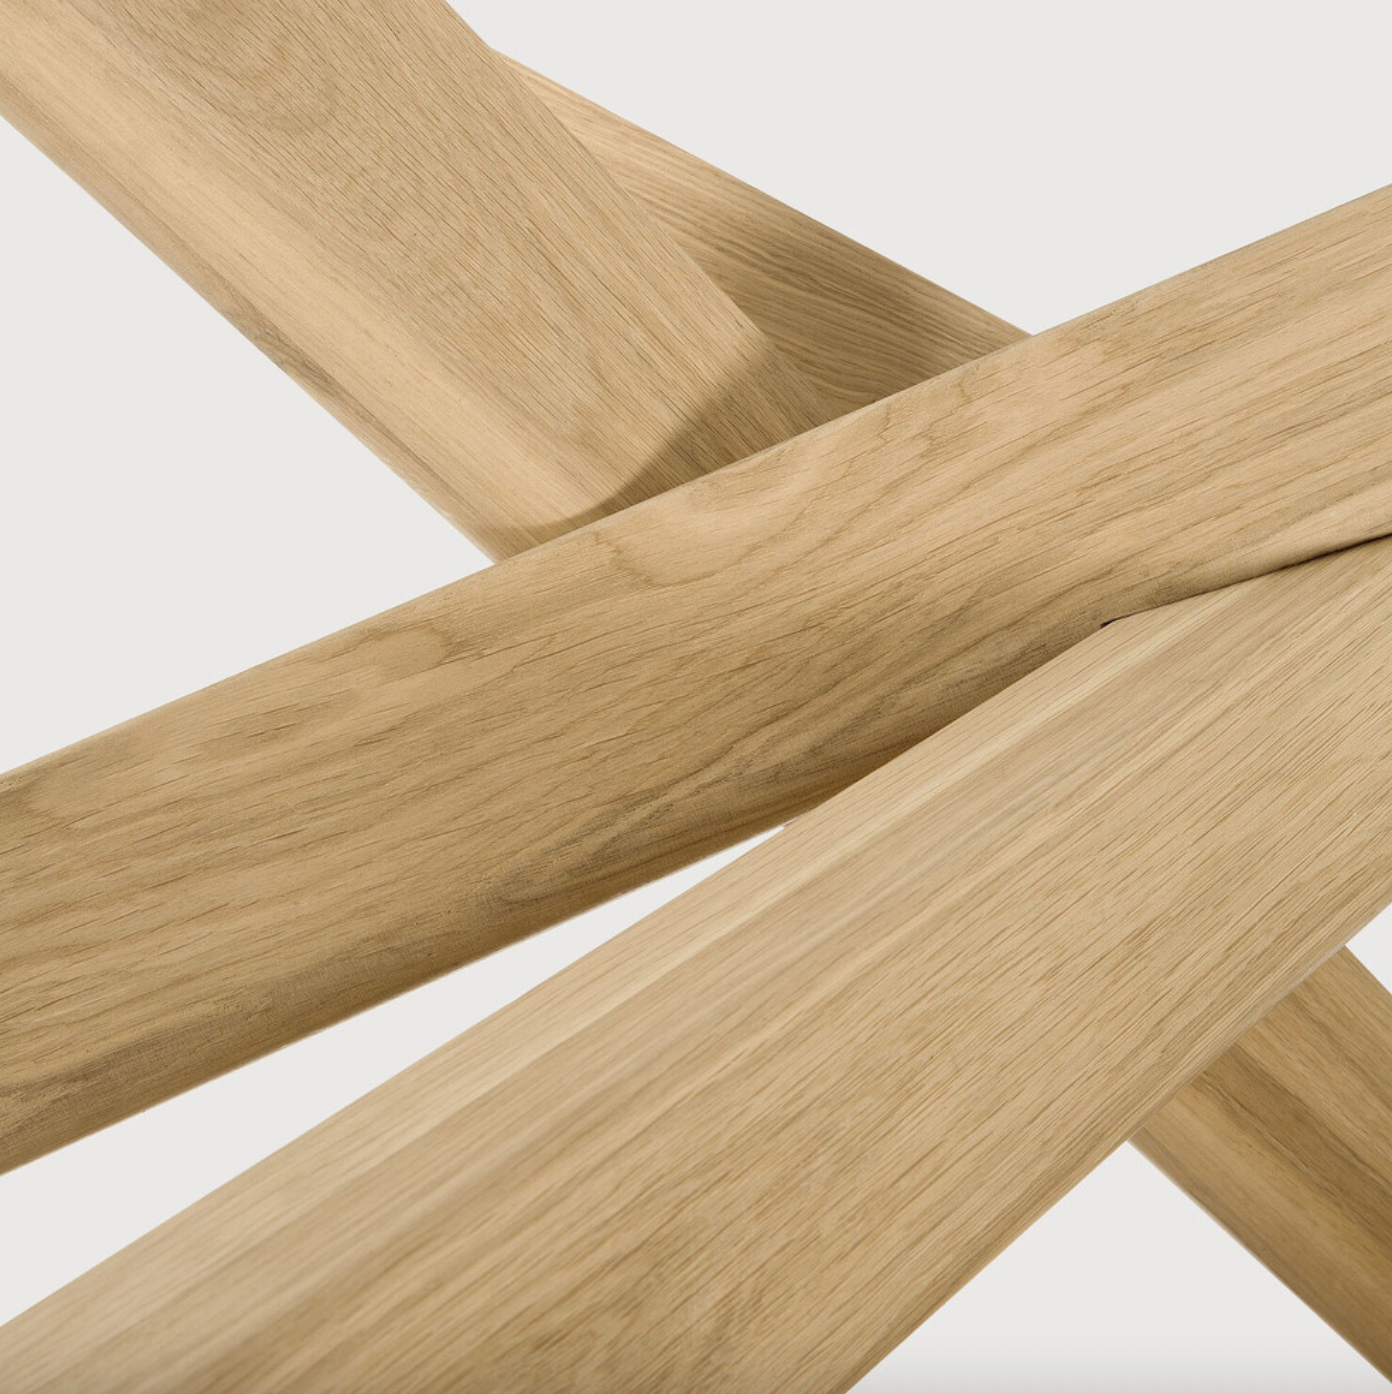 We love the sculptural character of this Oak Mikado Dining Table - Round. The legs interlock like a well-thought-out puzzle, making it easier to interact with your guests and allows you to converse with your family and friends for years to come!  Designed by Alain van Havre  Material: Oak, 100% Solid Wood Finish: Oiled